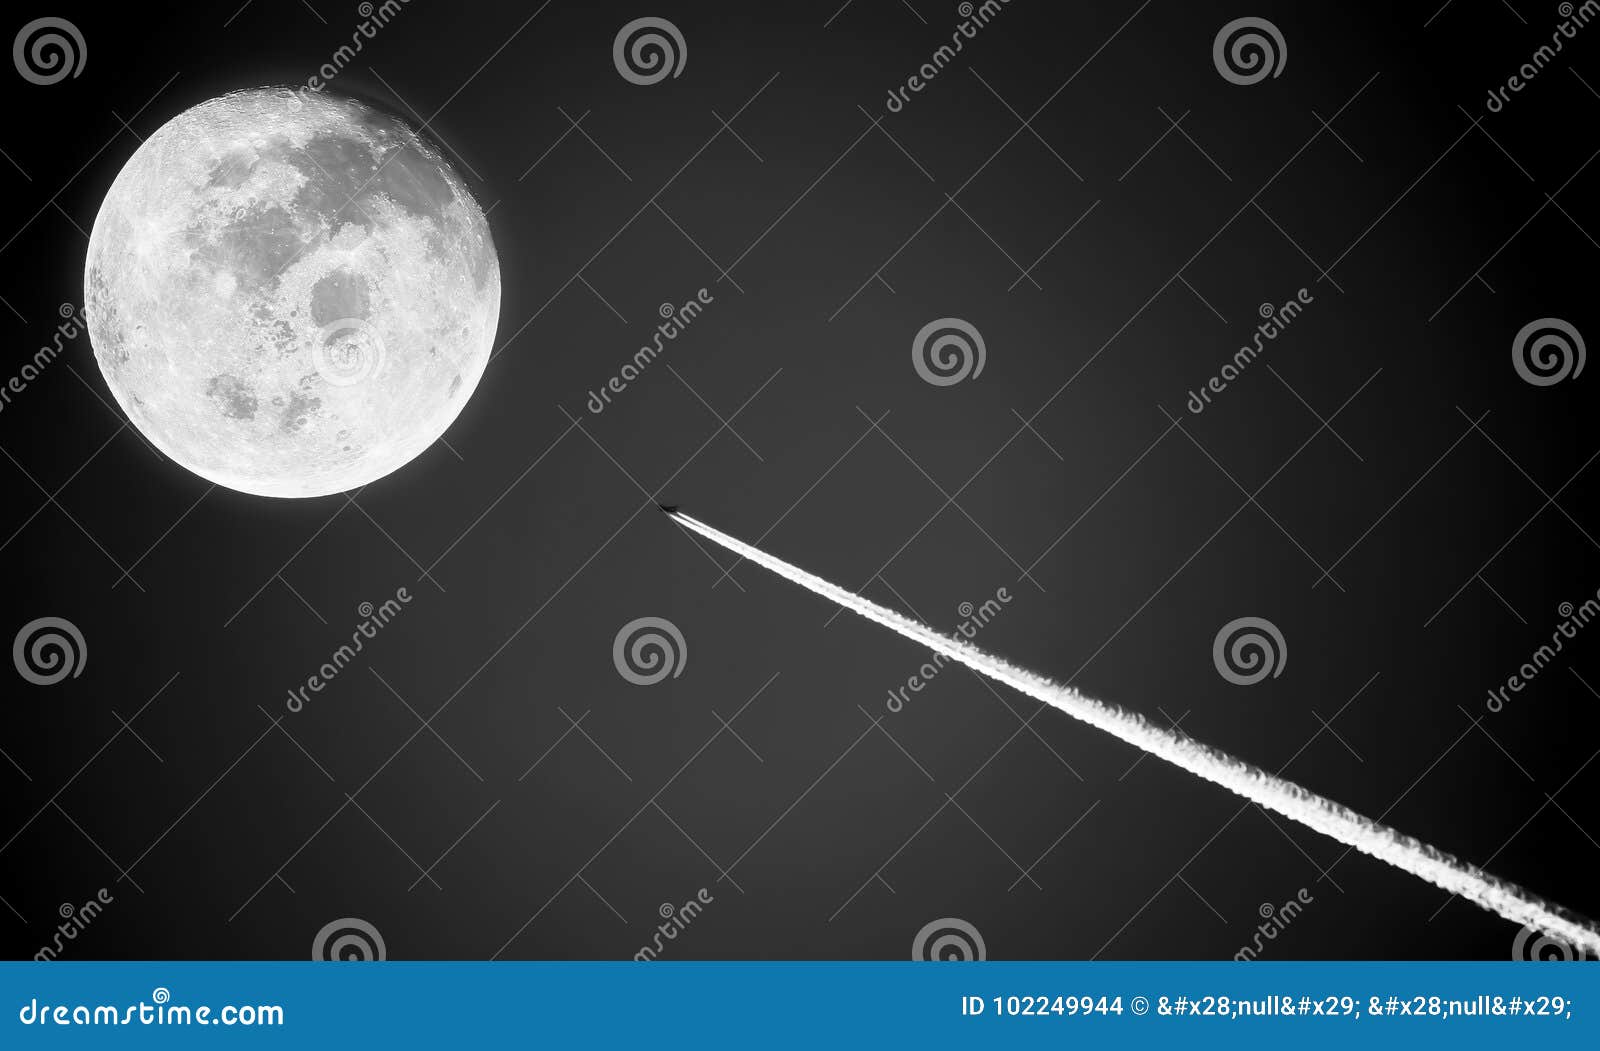 Fly Me To The Moon Id